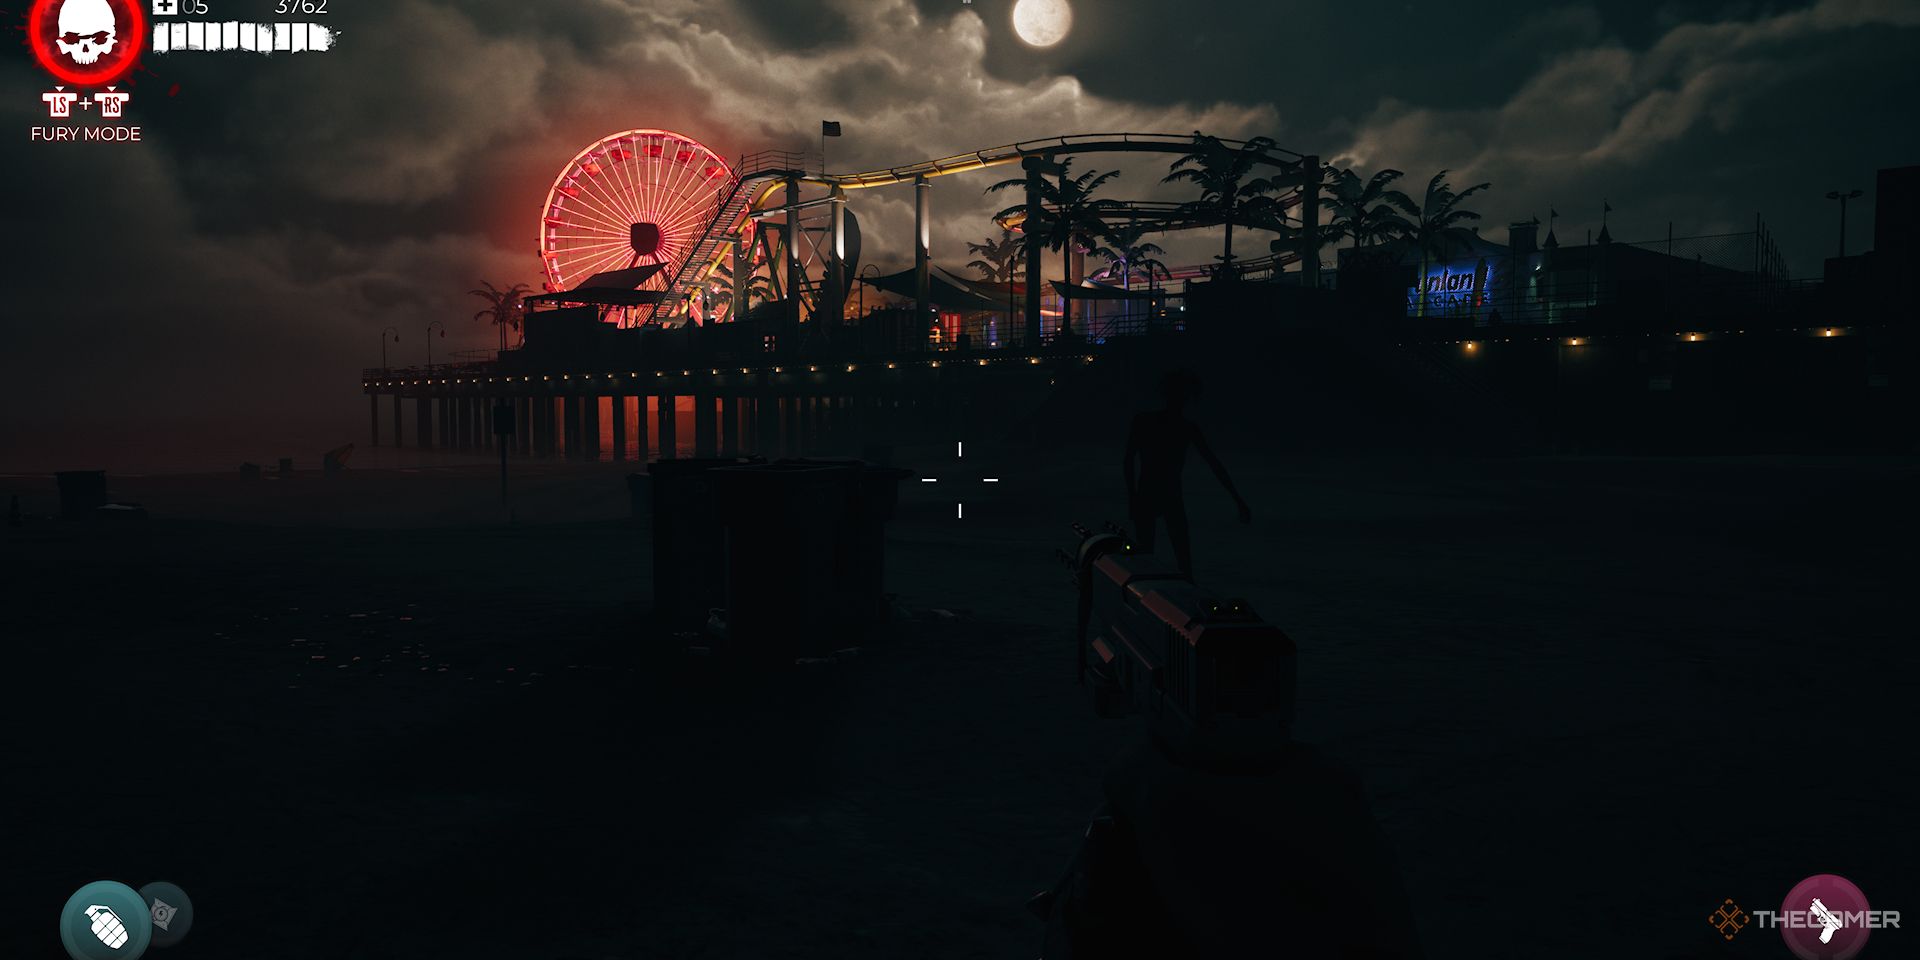 Image has a ferris wheel in the distance